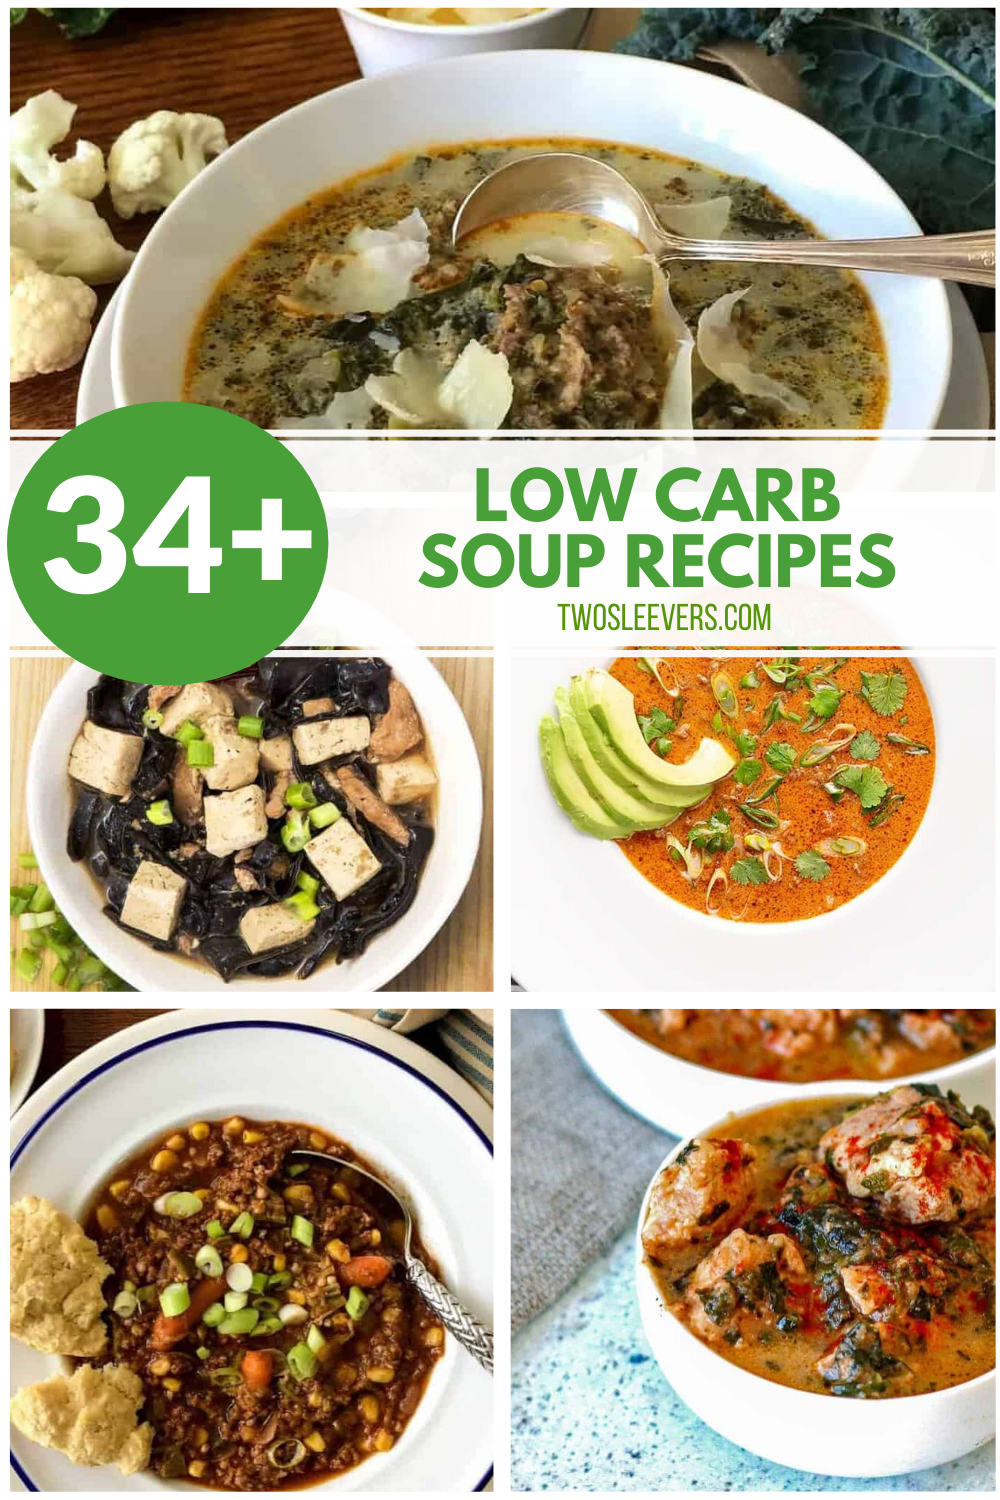 A collage of 5 low carb soups in white bowls.